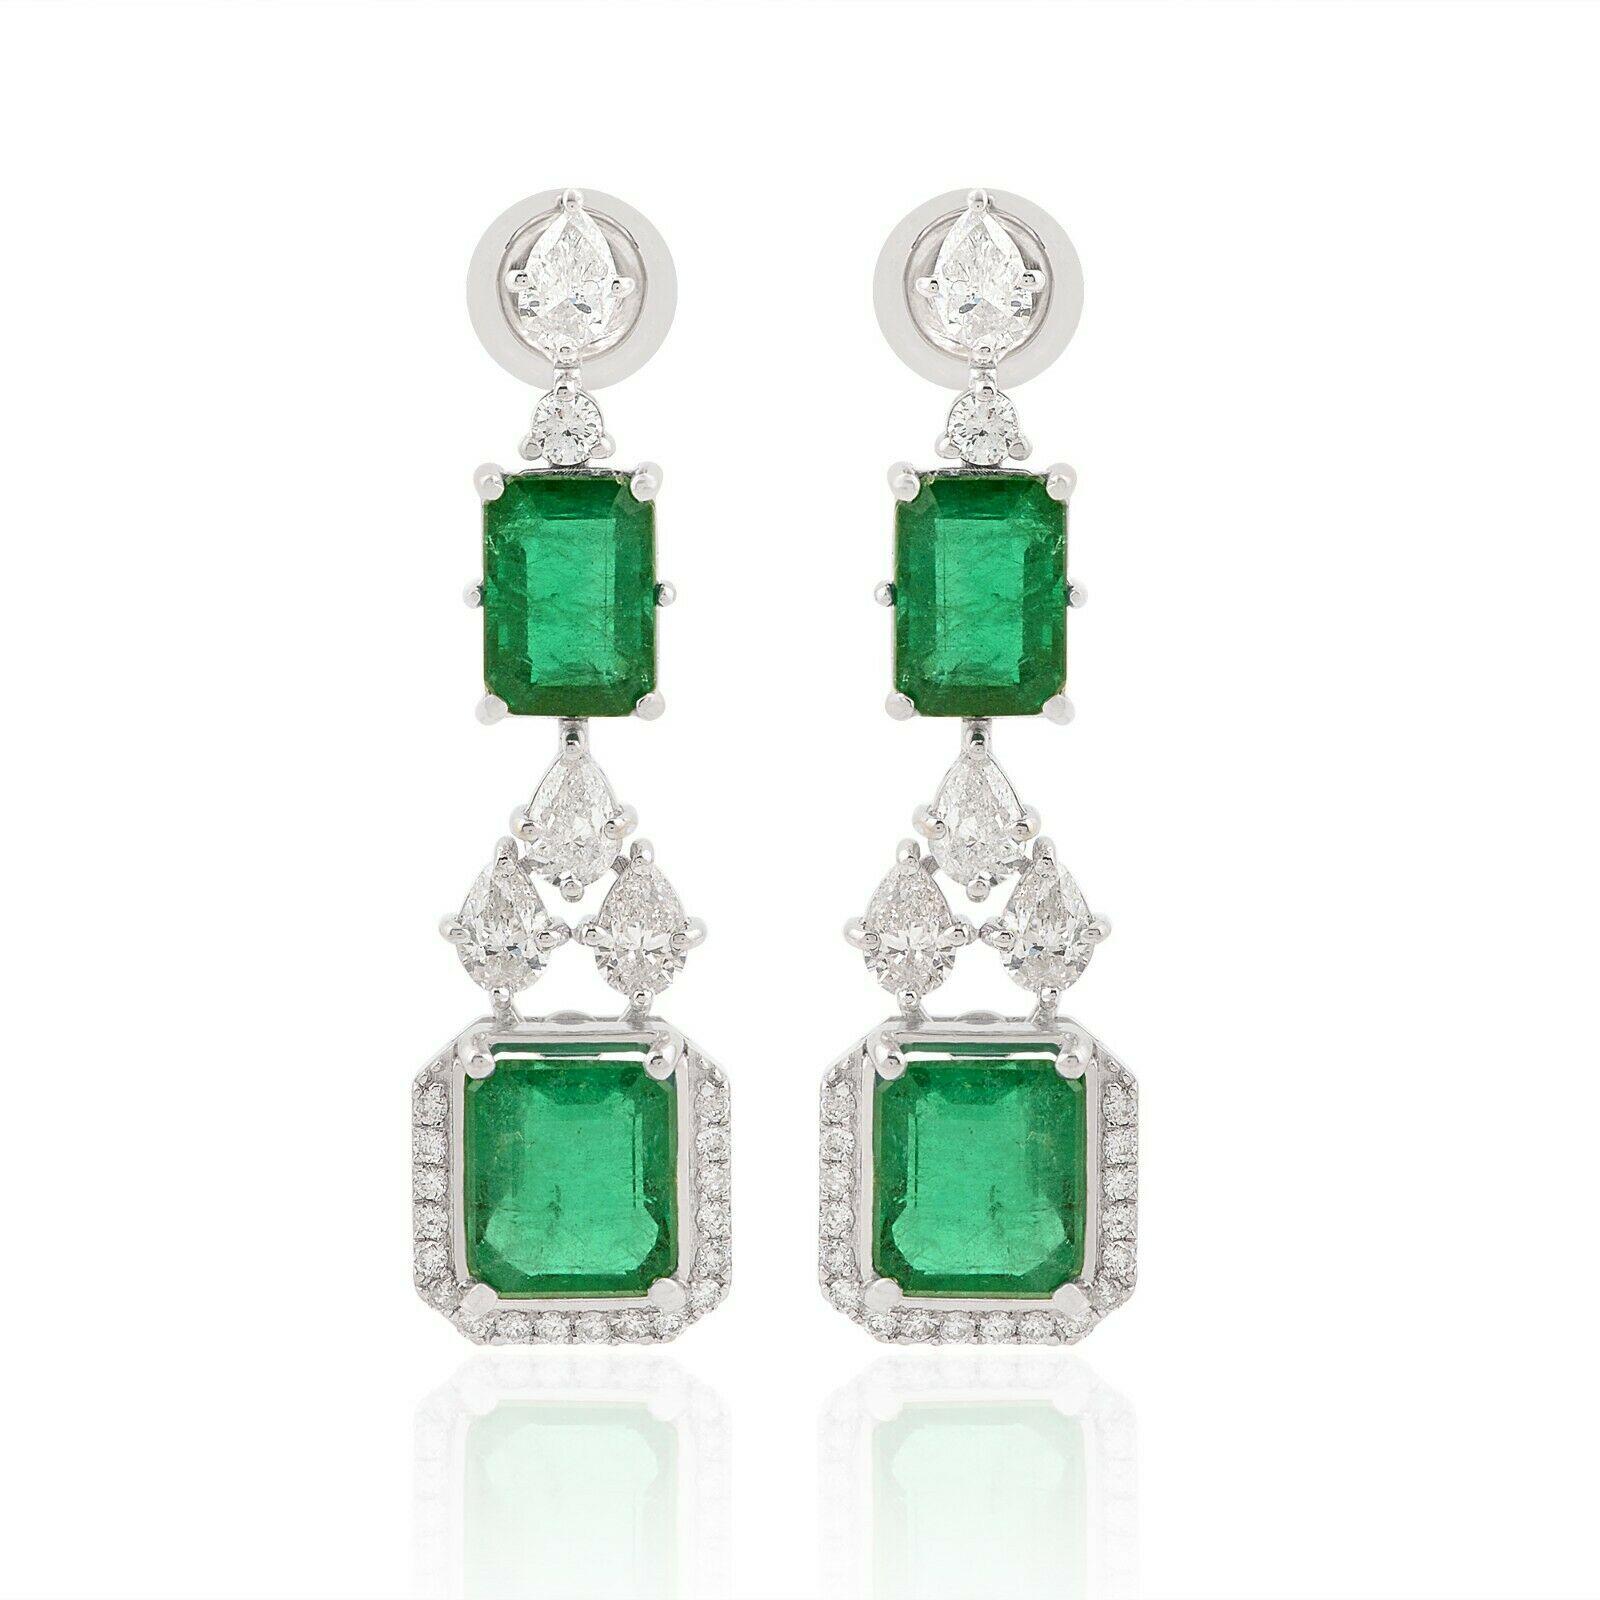 Cast in 14 karat gold, these beautiful earrings are hand set with 7.28 carats emerald and 1.80 carats of glimmering diamonds. 

FOLLOW MEGHNA JEWELS storefront to view the latest collection & exclusive pieces. Meghna Jewels is proudly rated as a Top